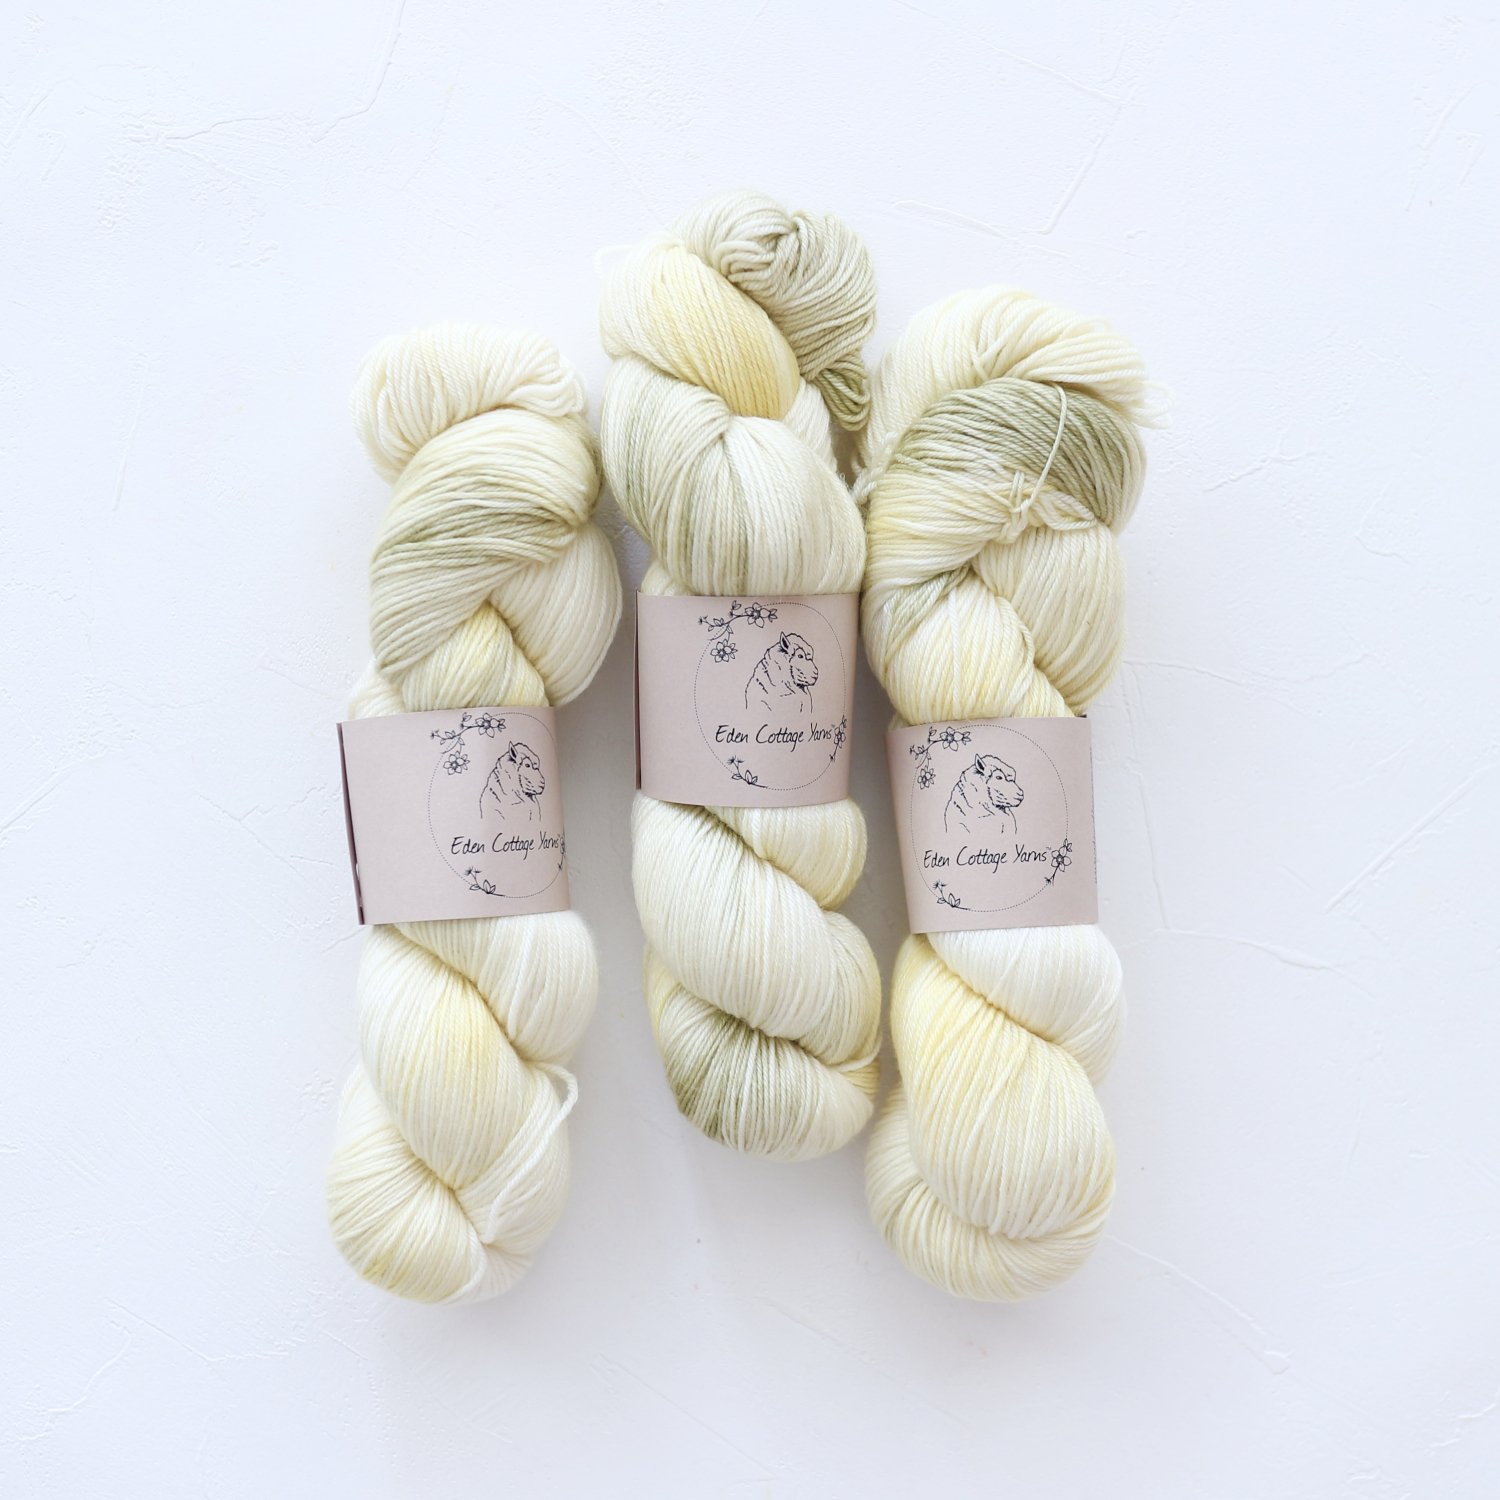 Eden Cottage Yarns<br>Pendle 4ply<br>Buttercup